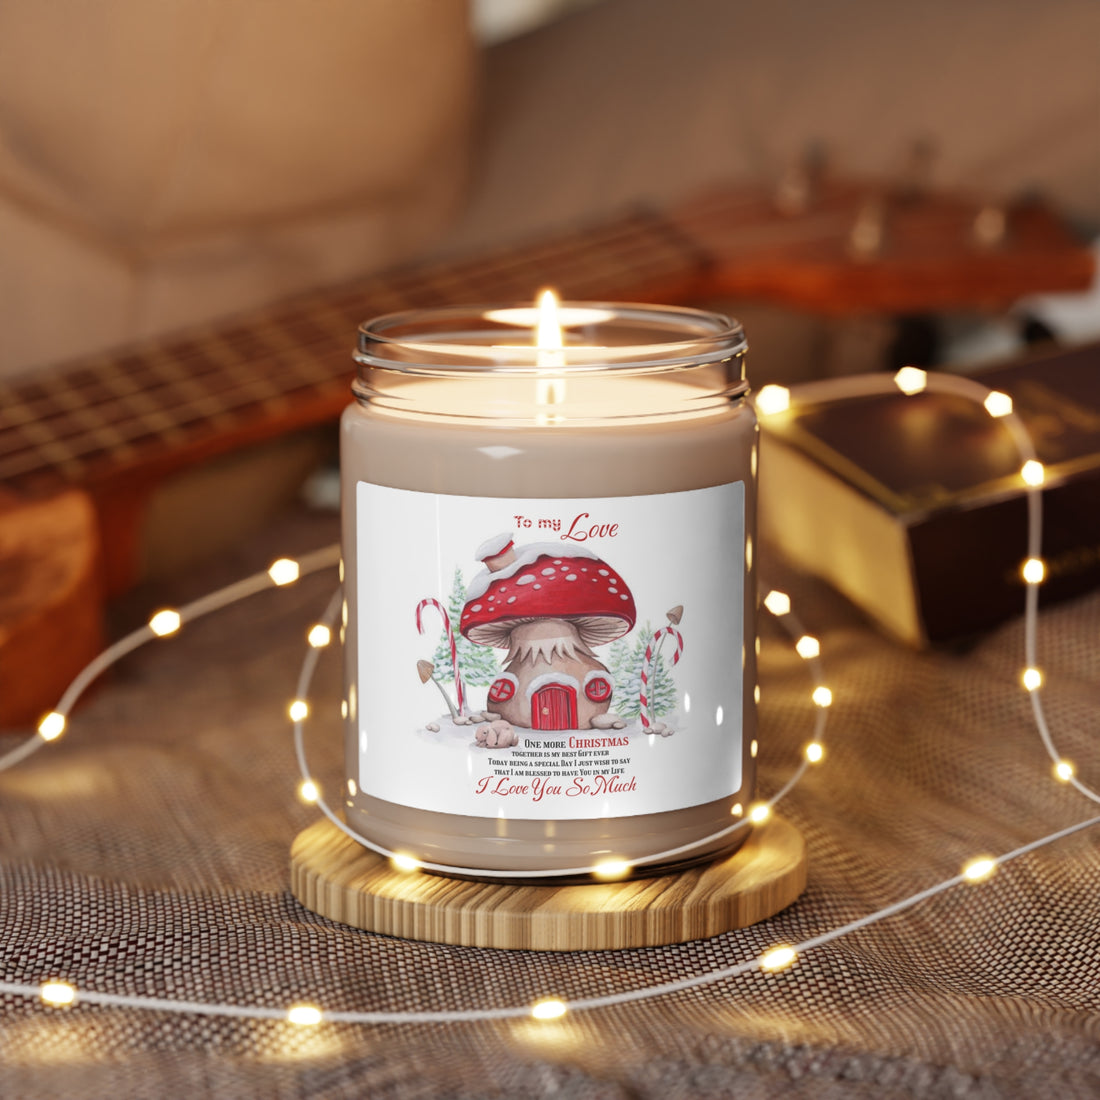 Scented Soy Candle, 9oz Christmas decoration I love You so much Home-clothes-jewelry